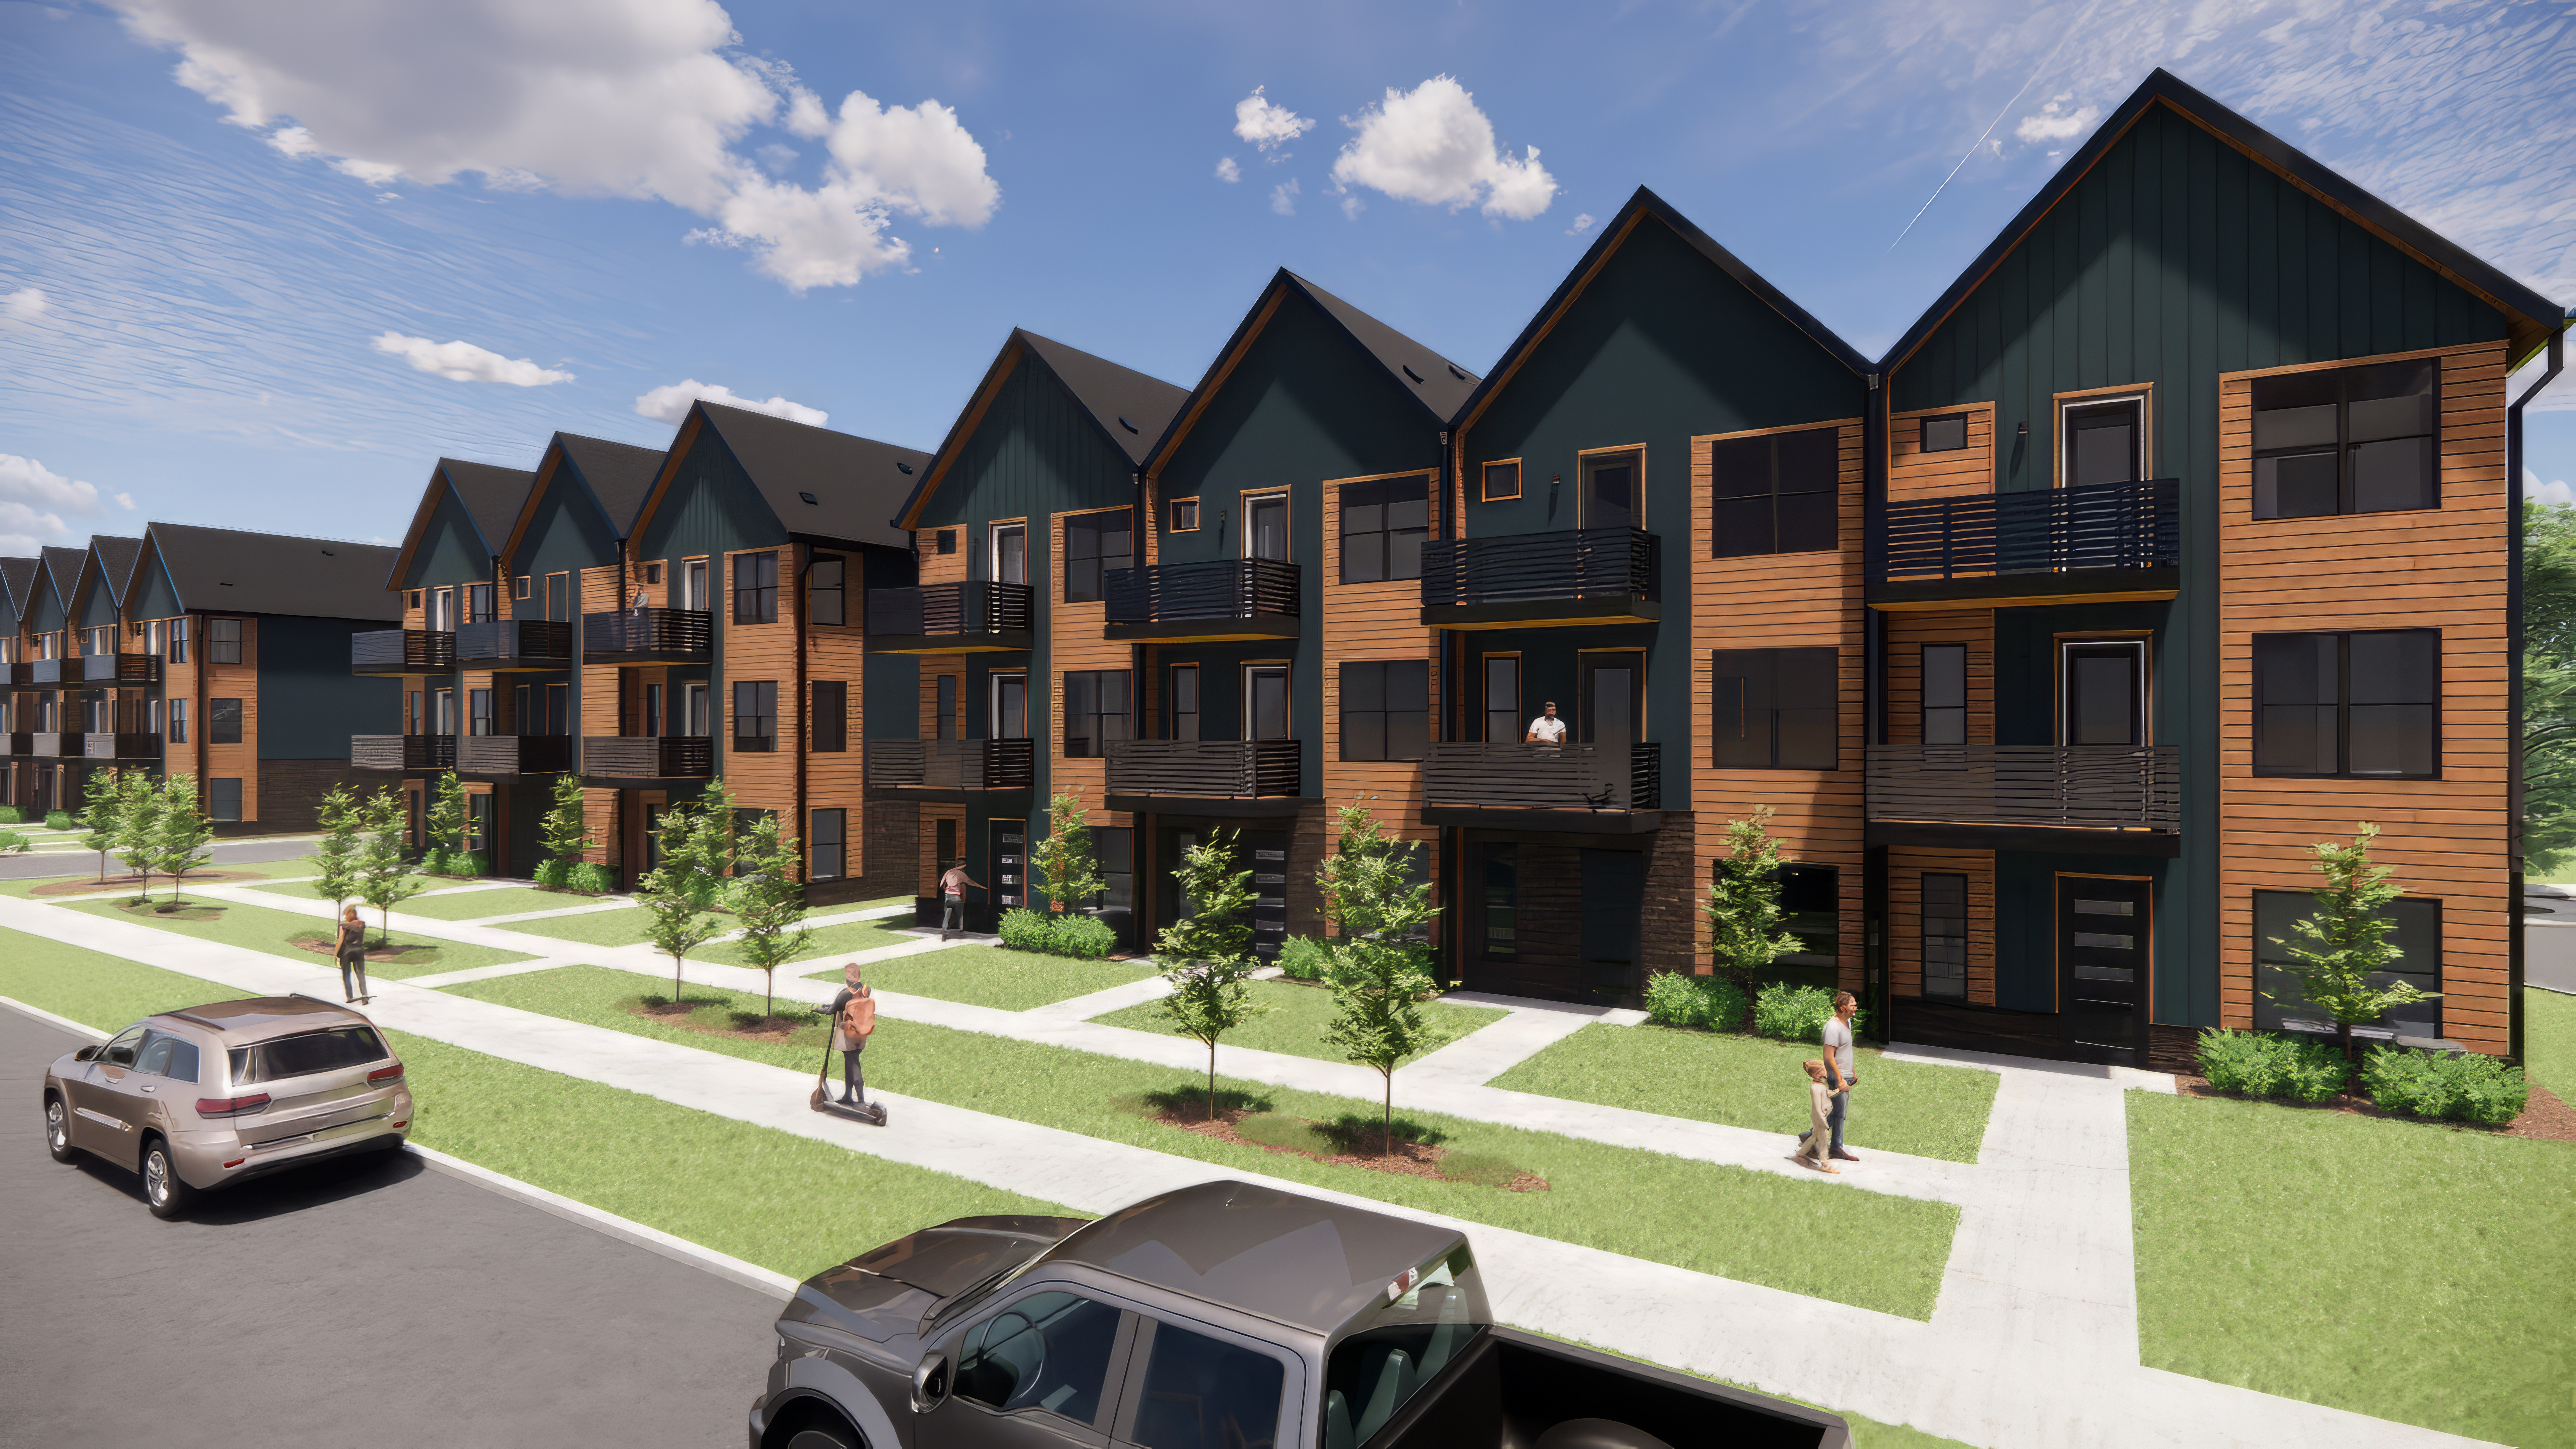 Renderings for the Row Townhomes in Johnstown, Colorado